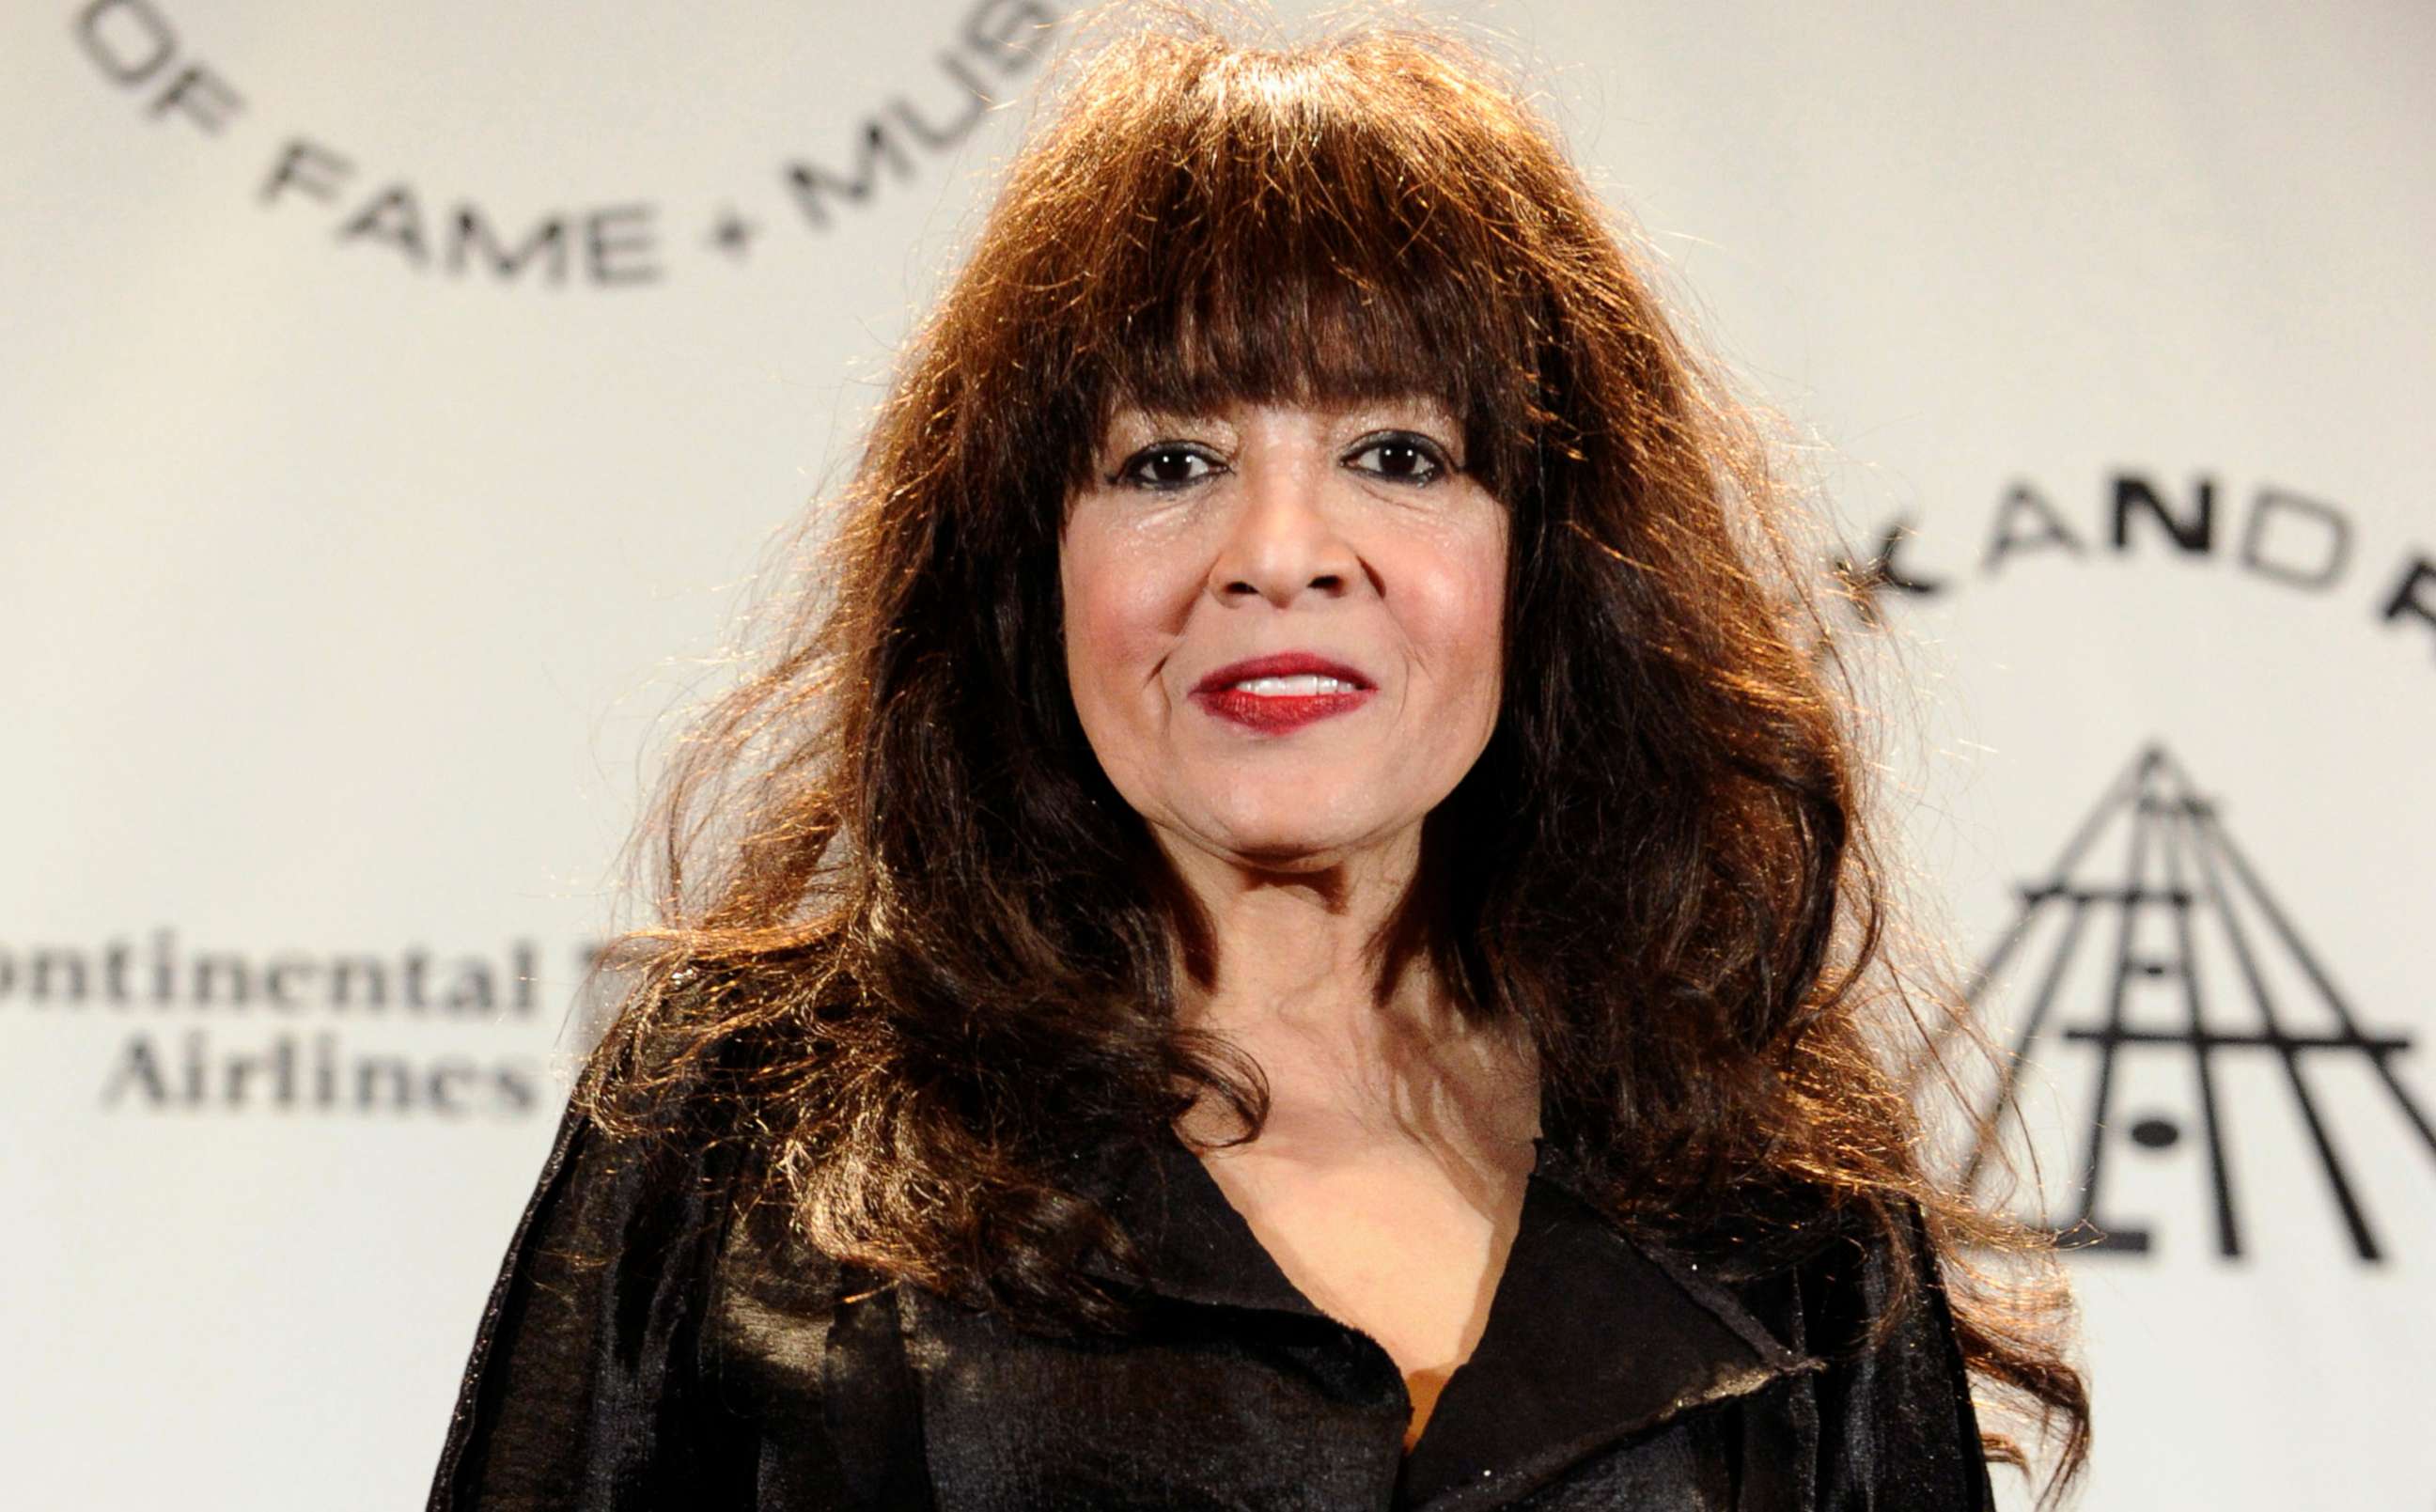 PHOTO: Ronnie Spector appears in the press room after performing at the Rock and Roll Hall of Fame induction ceremony on March 15, 2010, in New York.